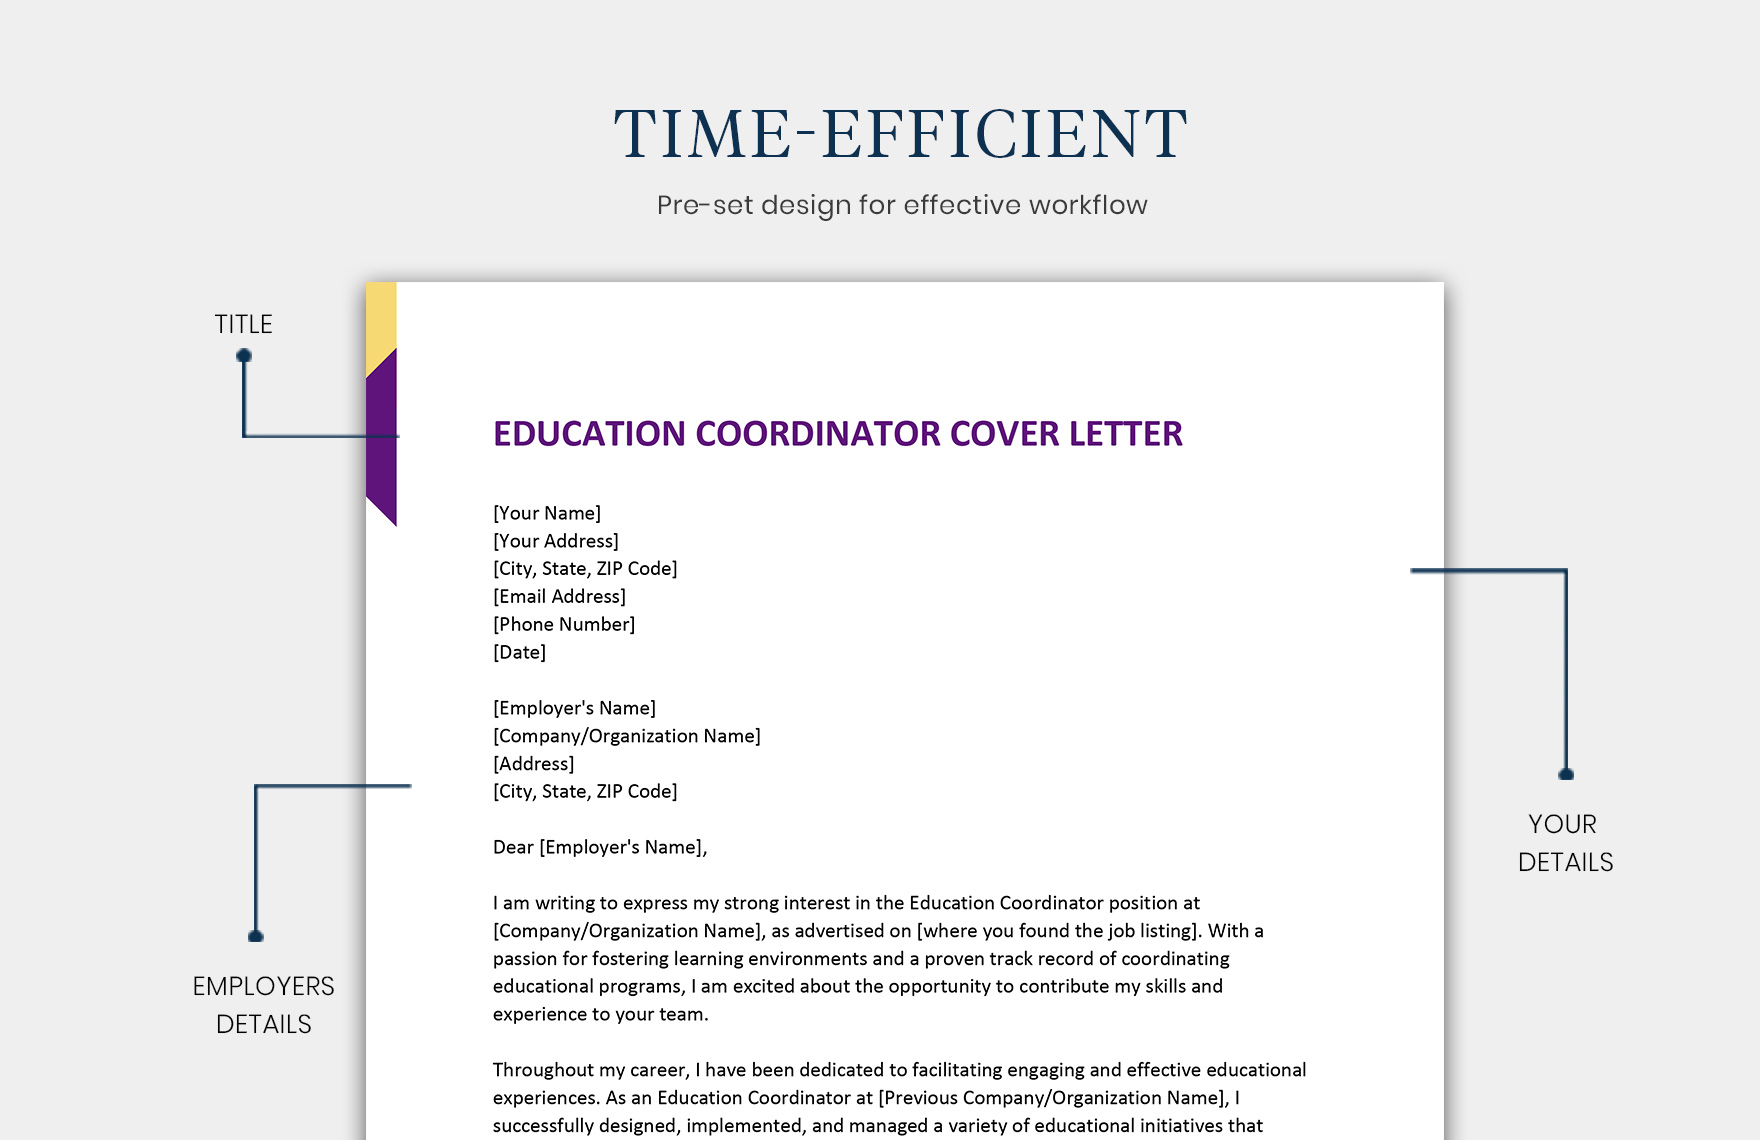 Education Coordinator Cover Letter